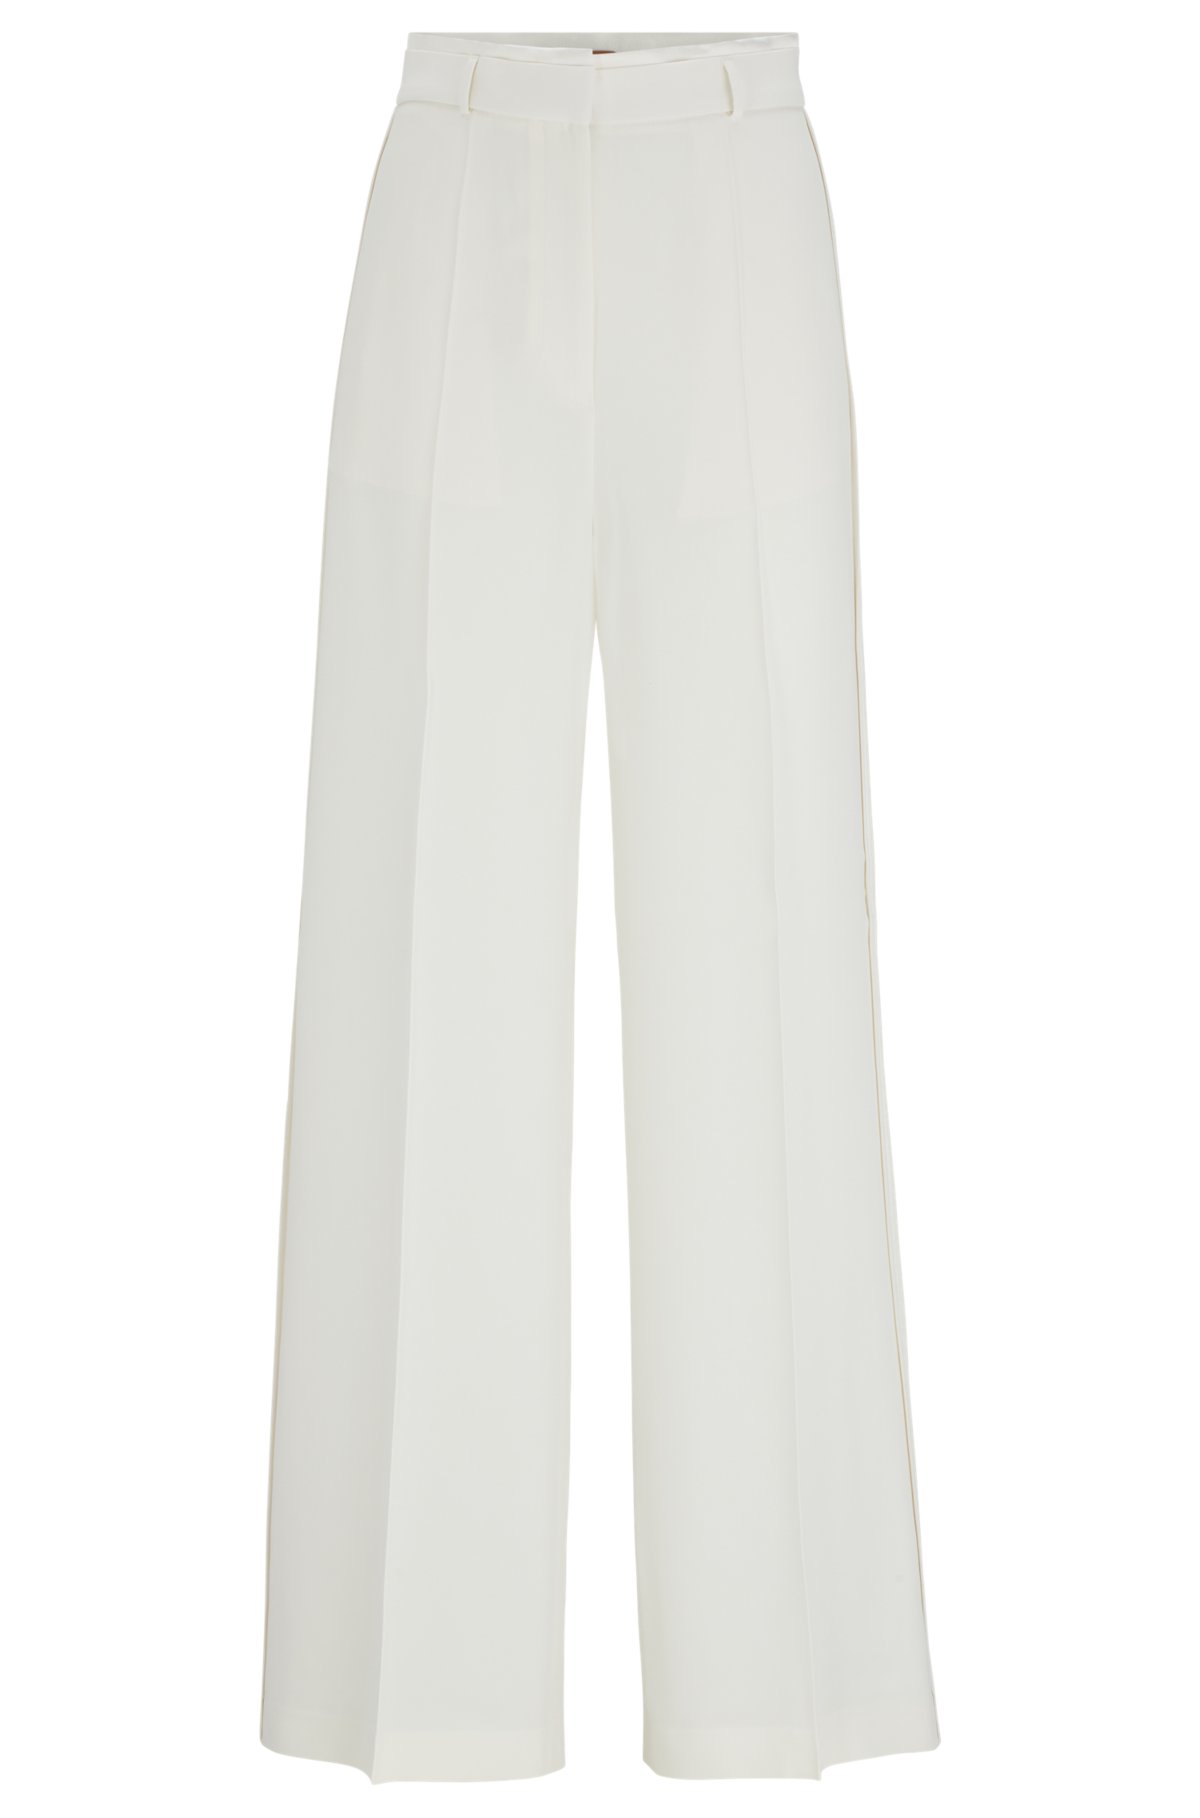 19 Fabulous Ideas On How To Wear White Wide Legged Pants, 43% OFF